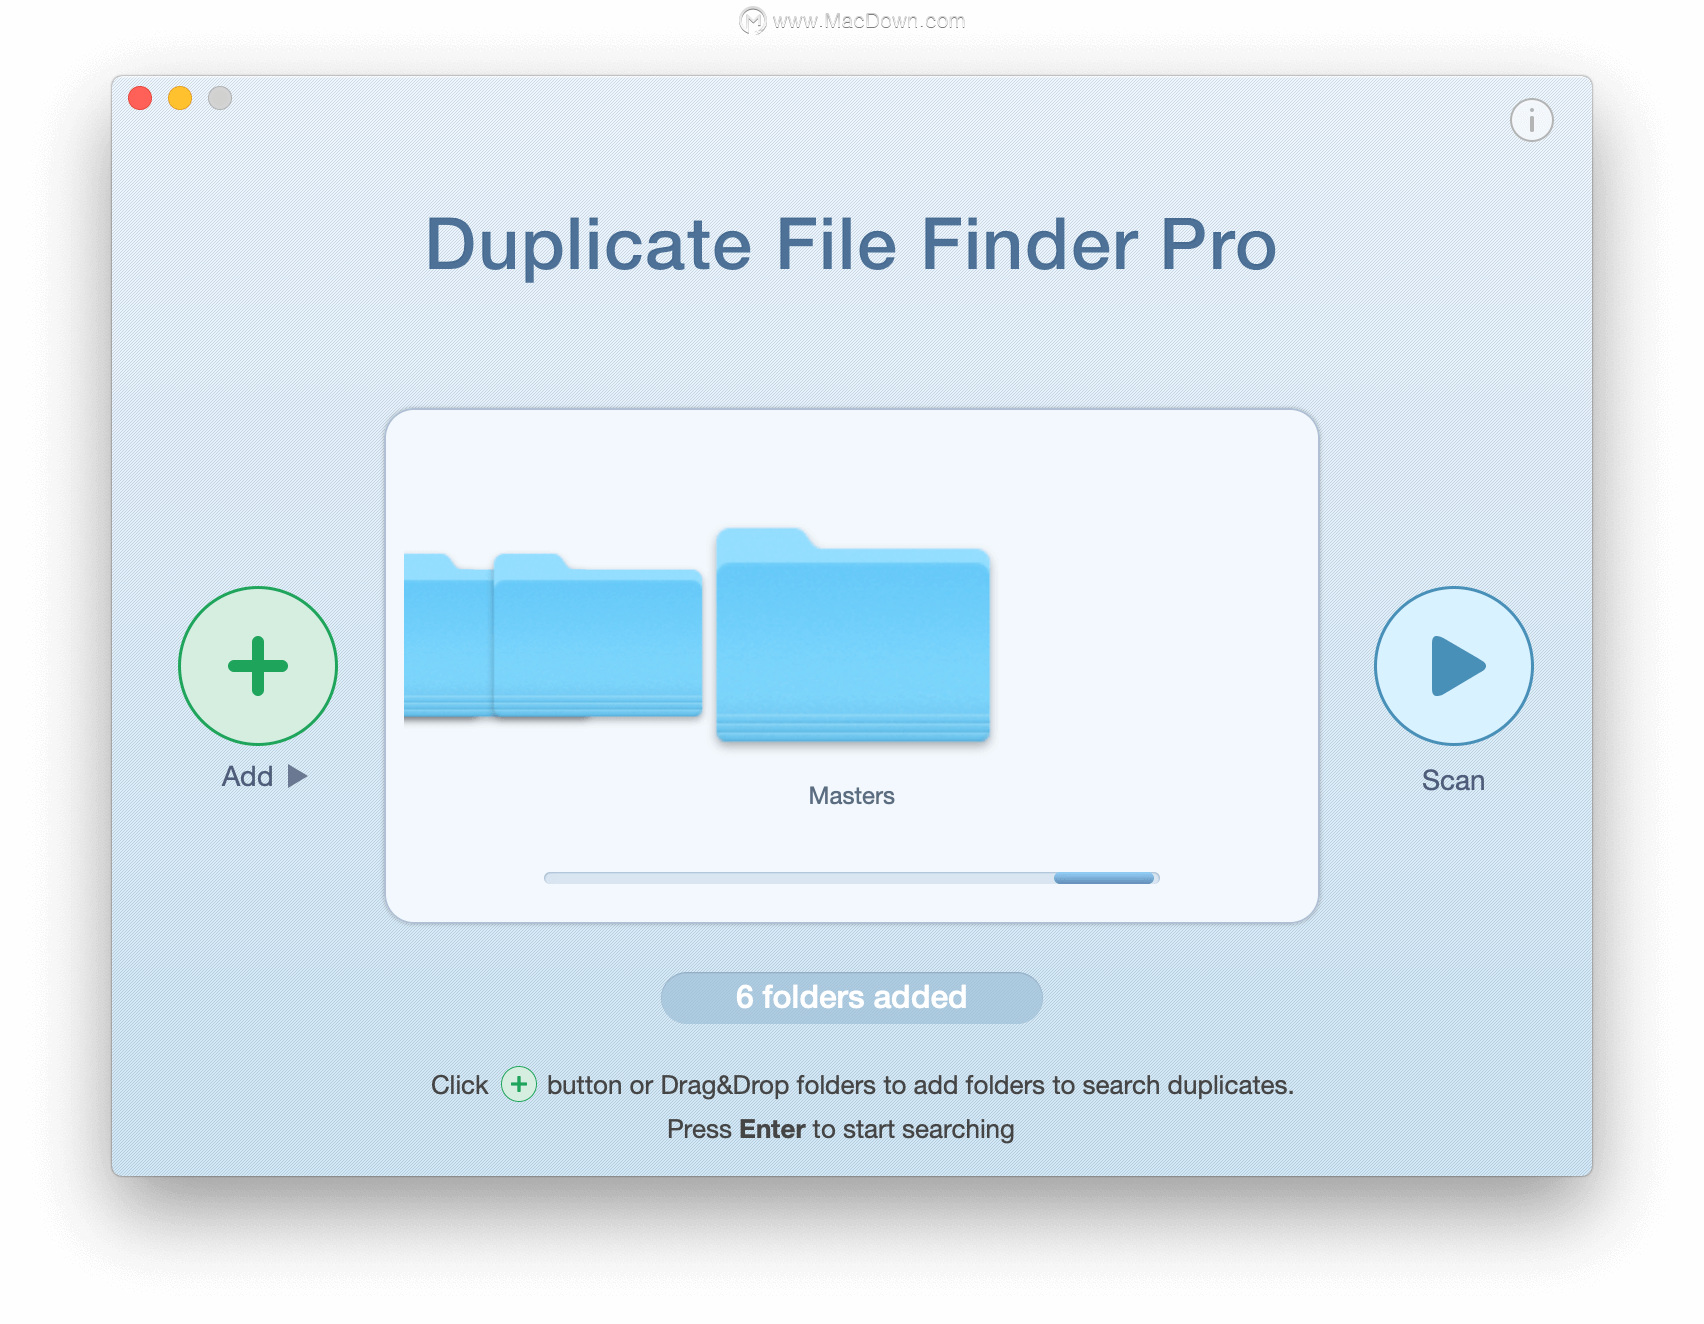 ashisoft duplicate file finder pro 7.2 with